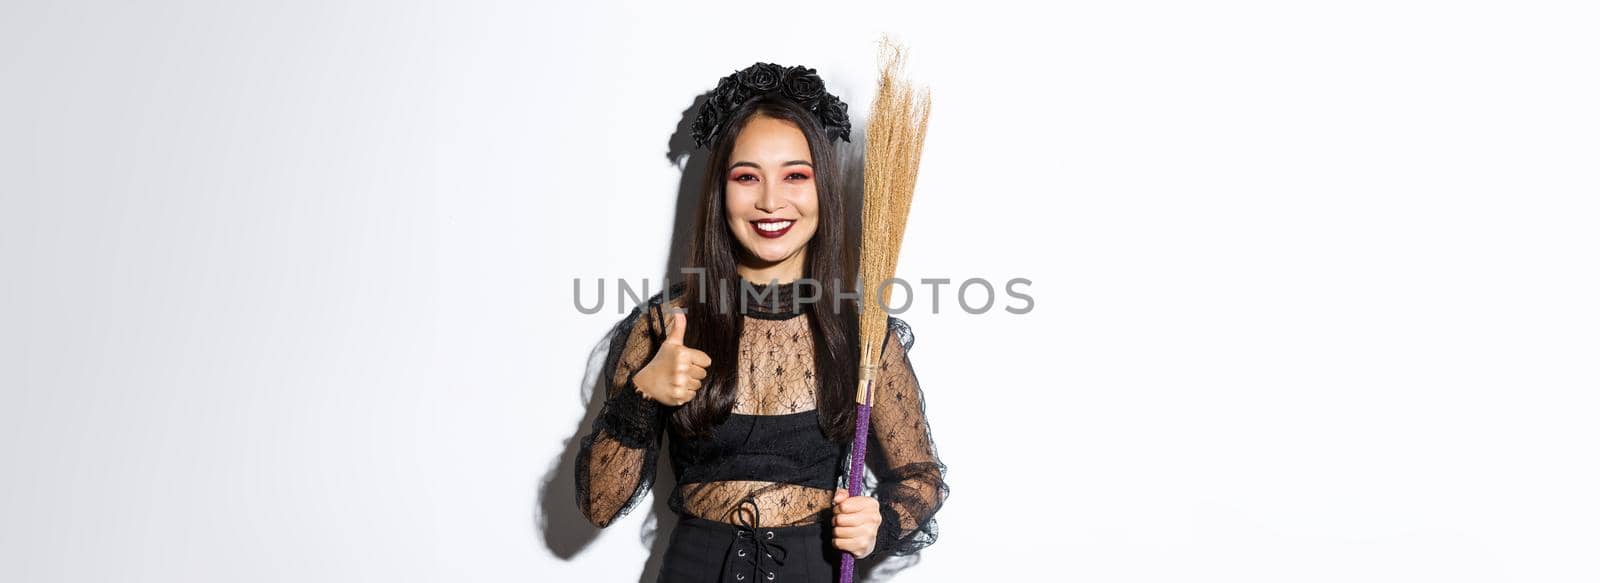 Image of smiling asian woman in witch costume with broom, showing thumbs-up in approval, standing over white background.